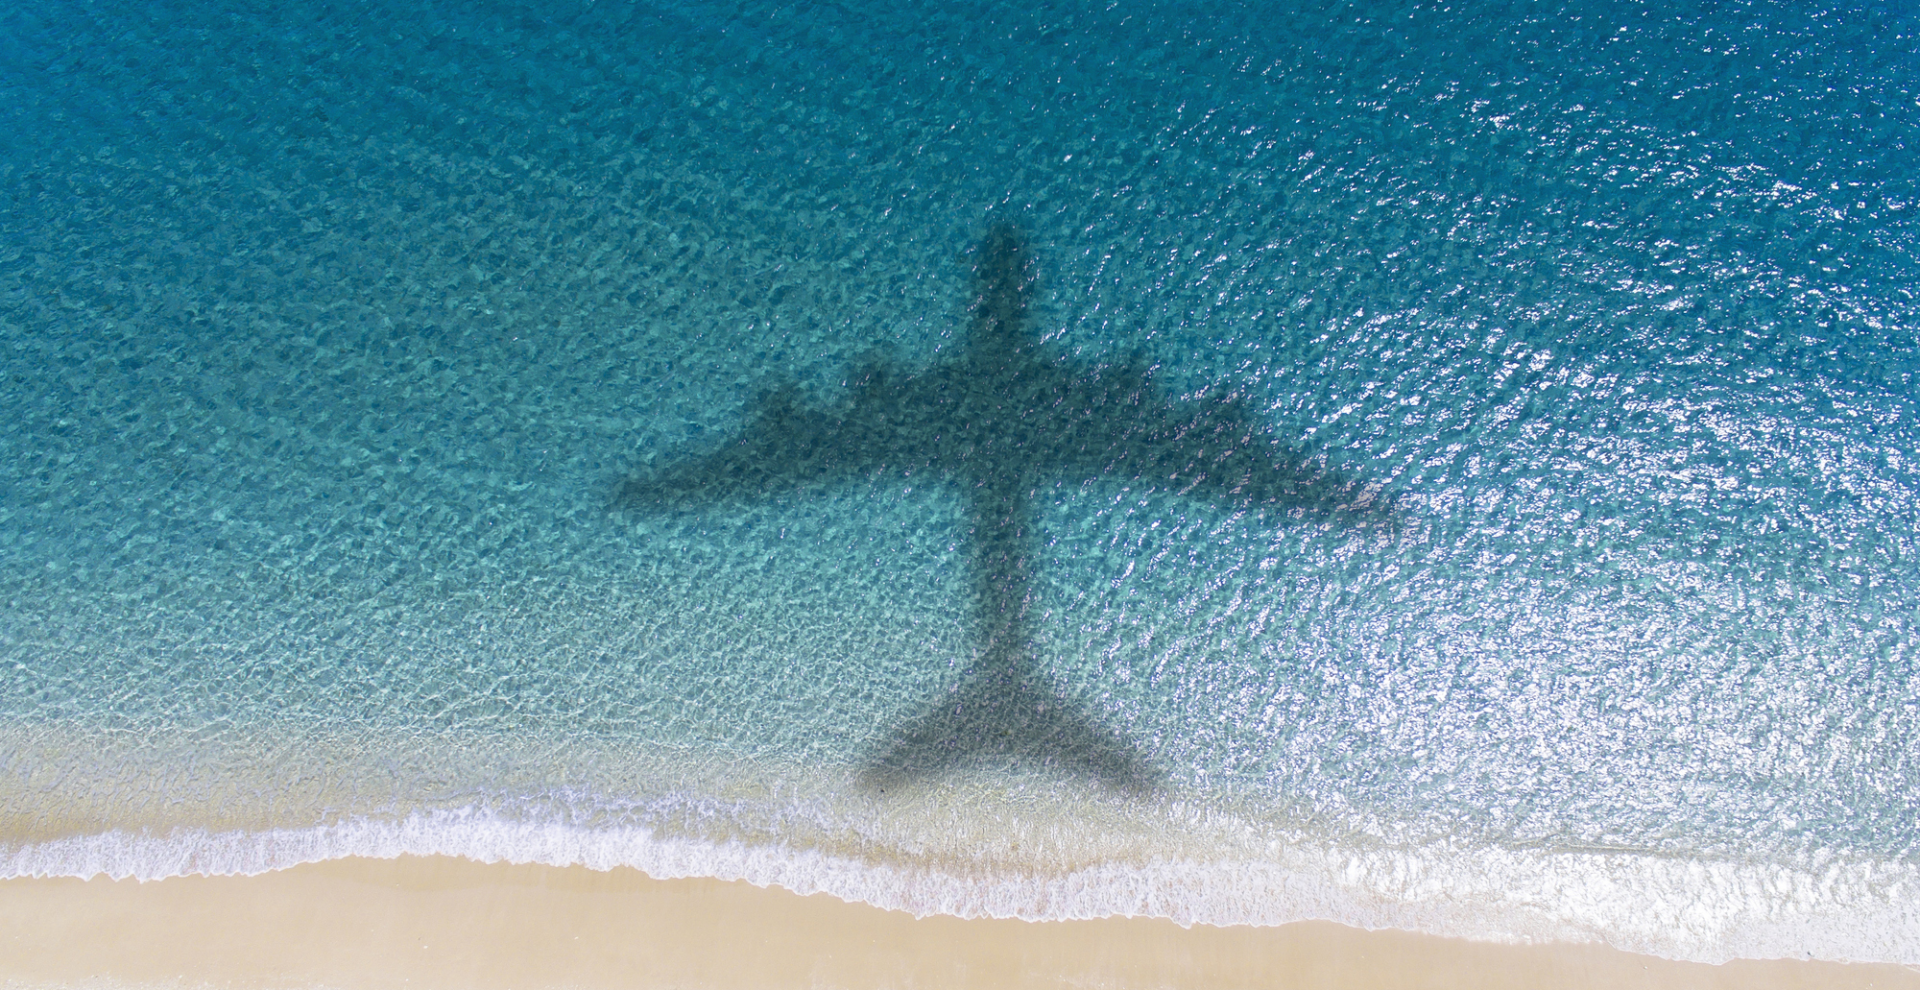 Shadow of a plane